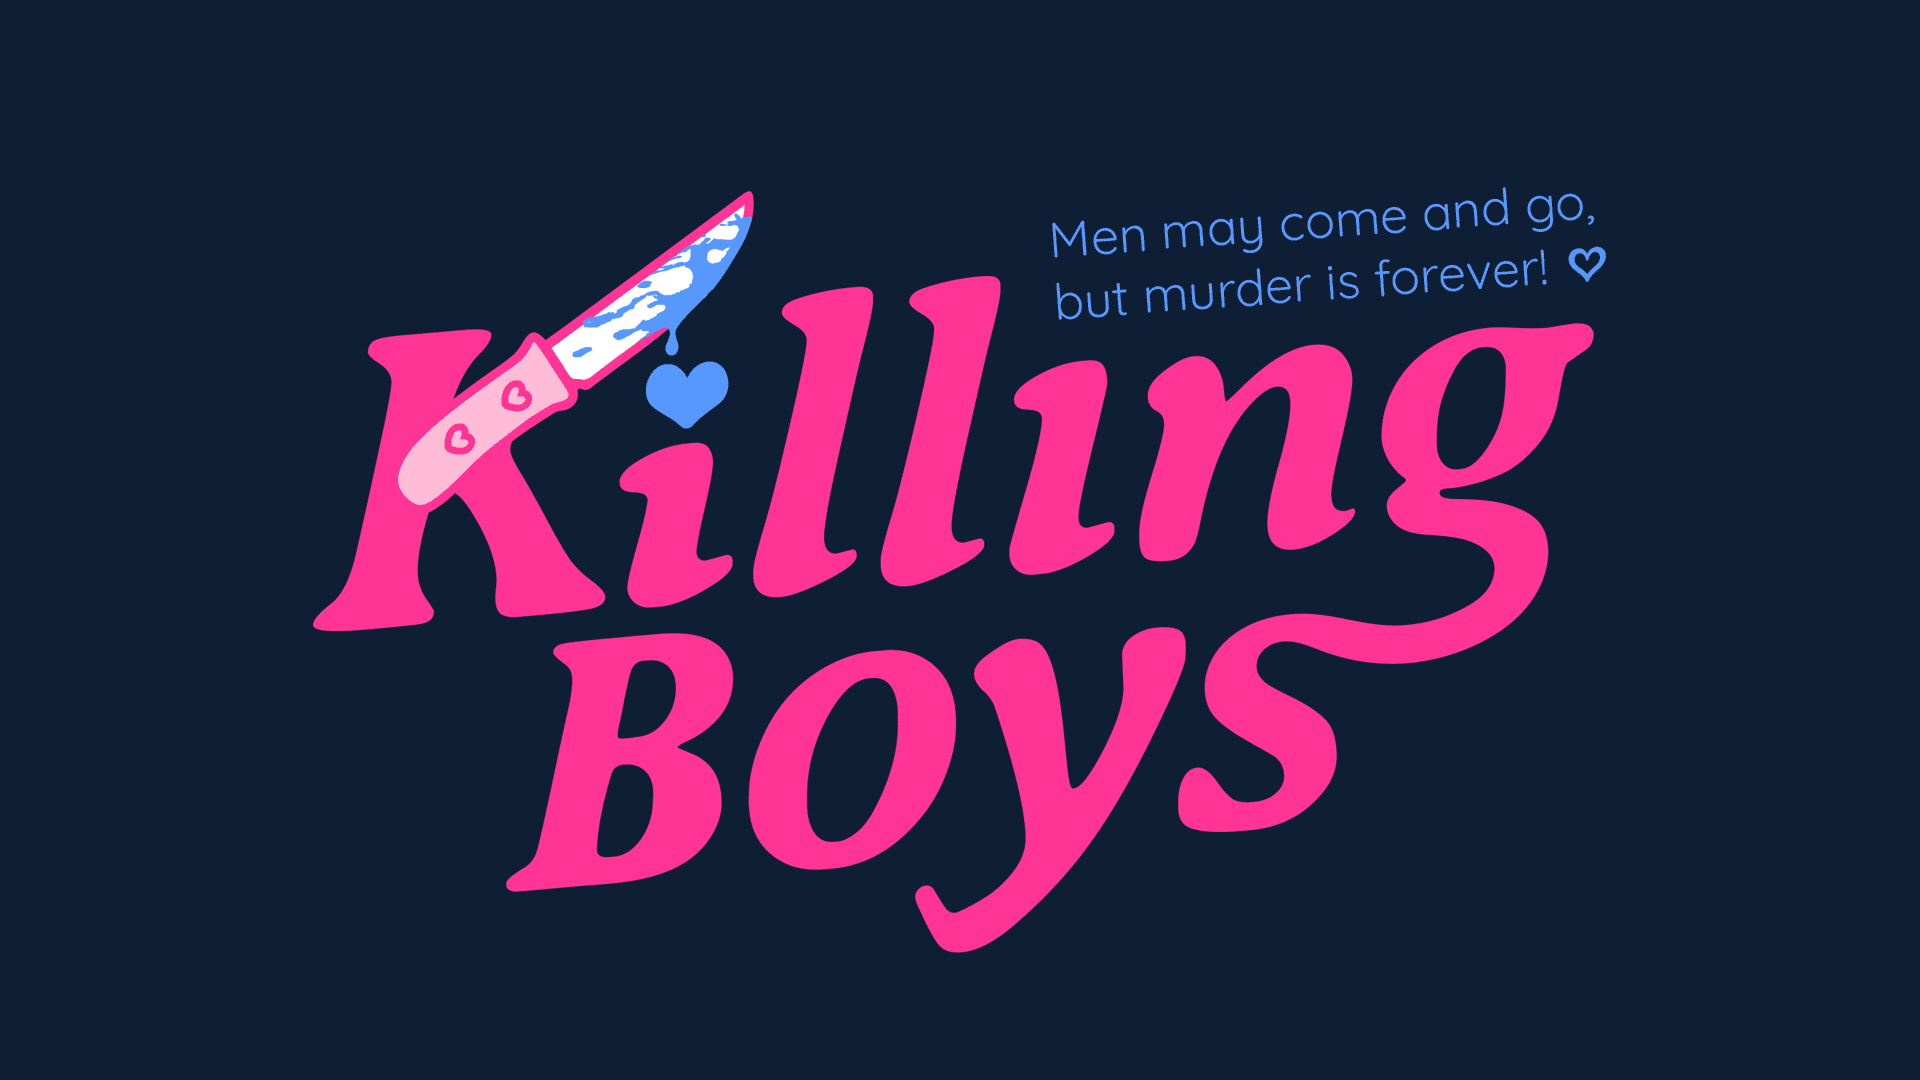 killing boys in pink text with a knife, and the phrase men may come and go. but murder is forever with a blue heart at the end, from first bite games